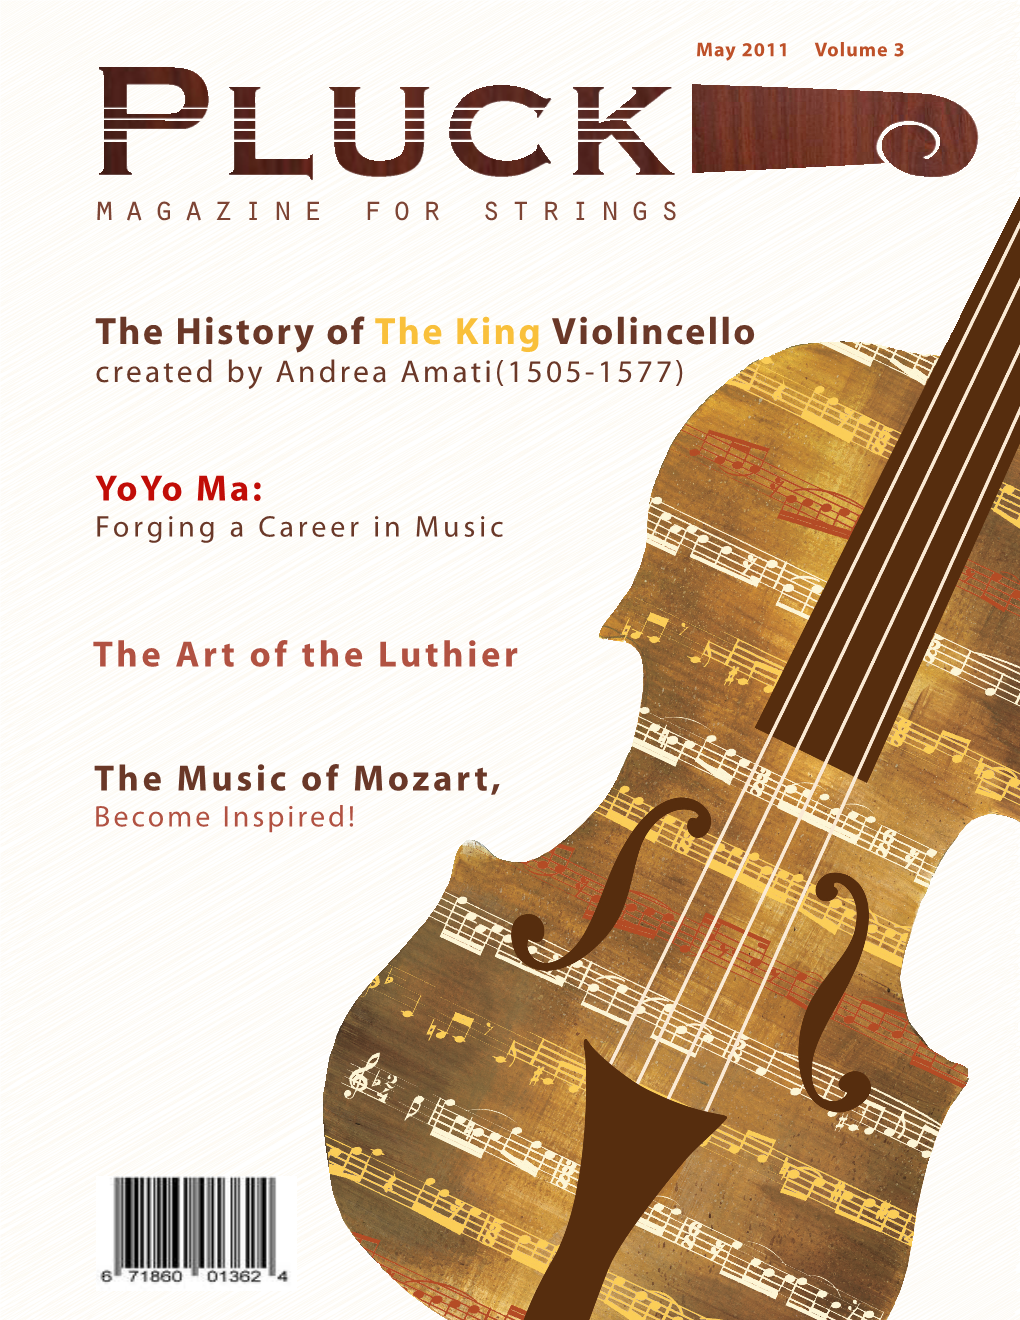 The History of the King Violincello Created by Andrea Amati(1505-1577)